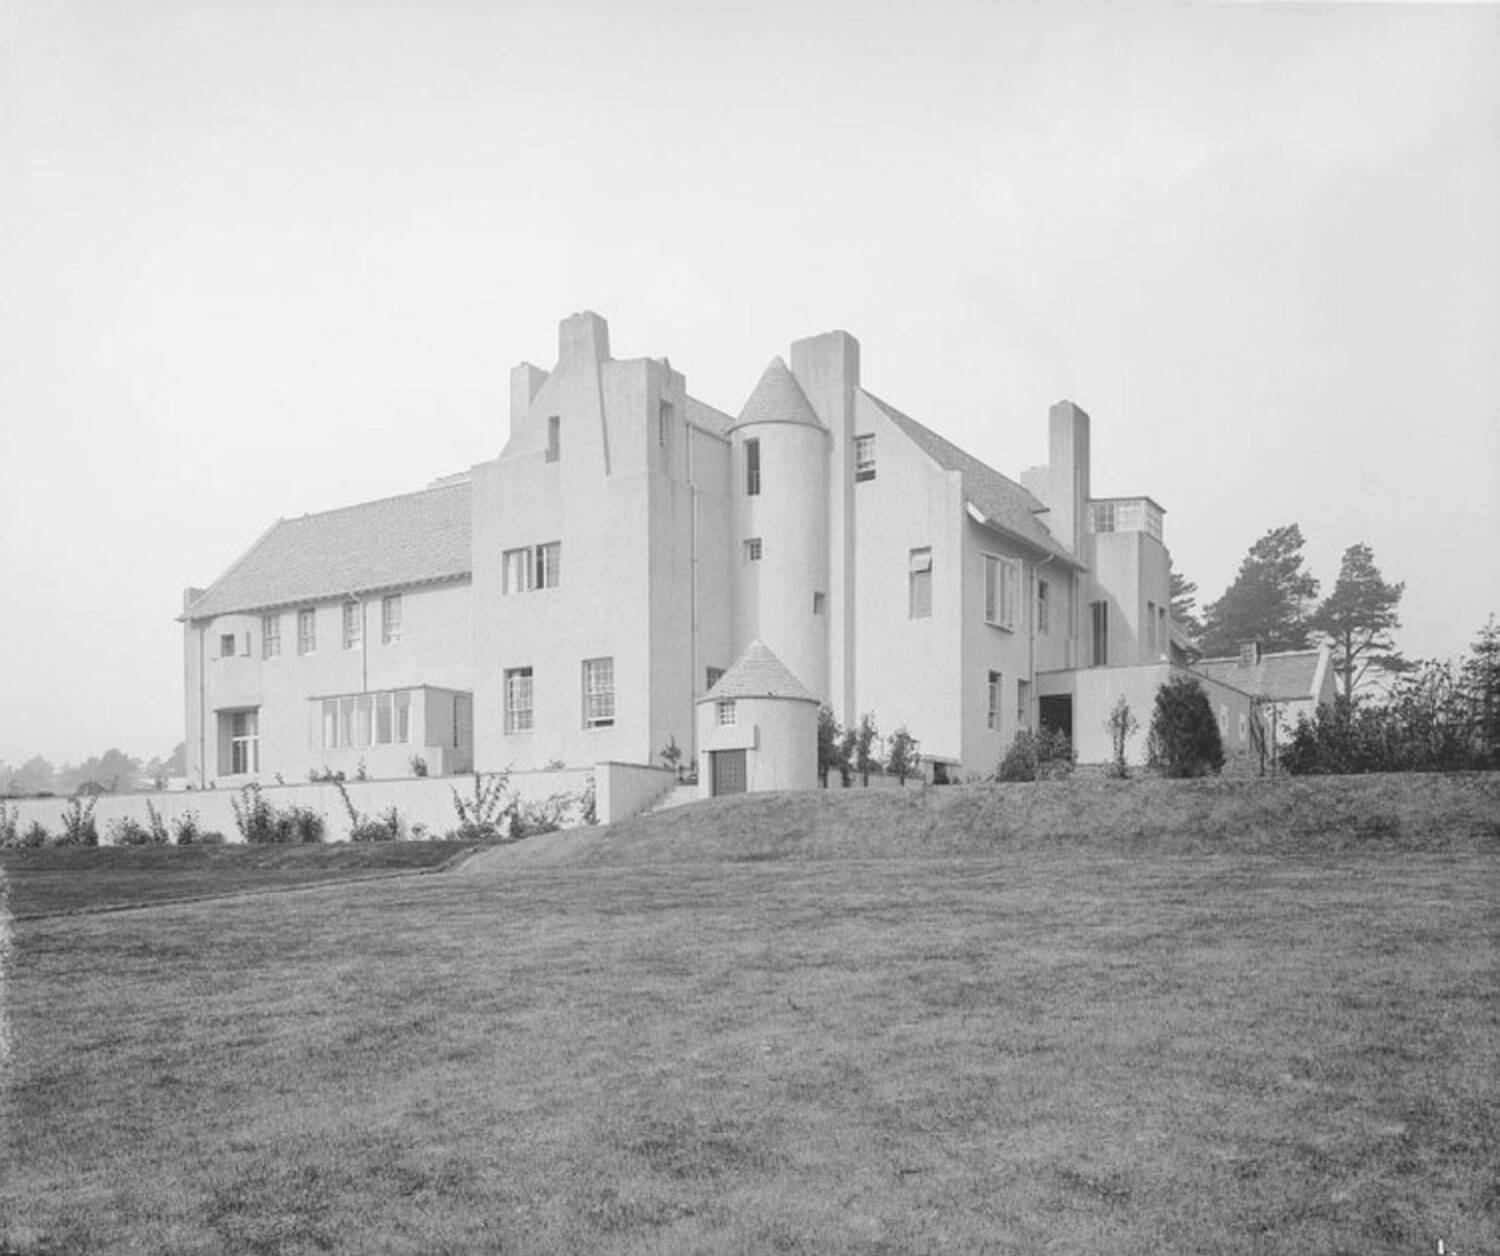 Black and white photograph of the Hill House in Helensburgh.